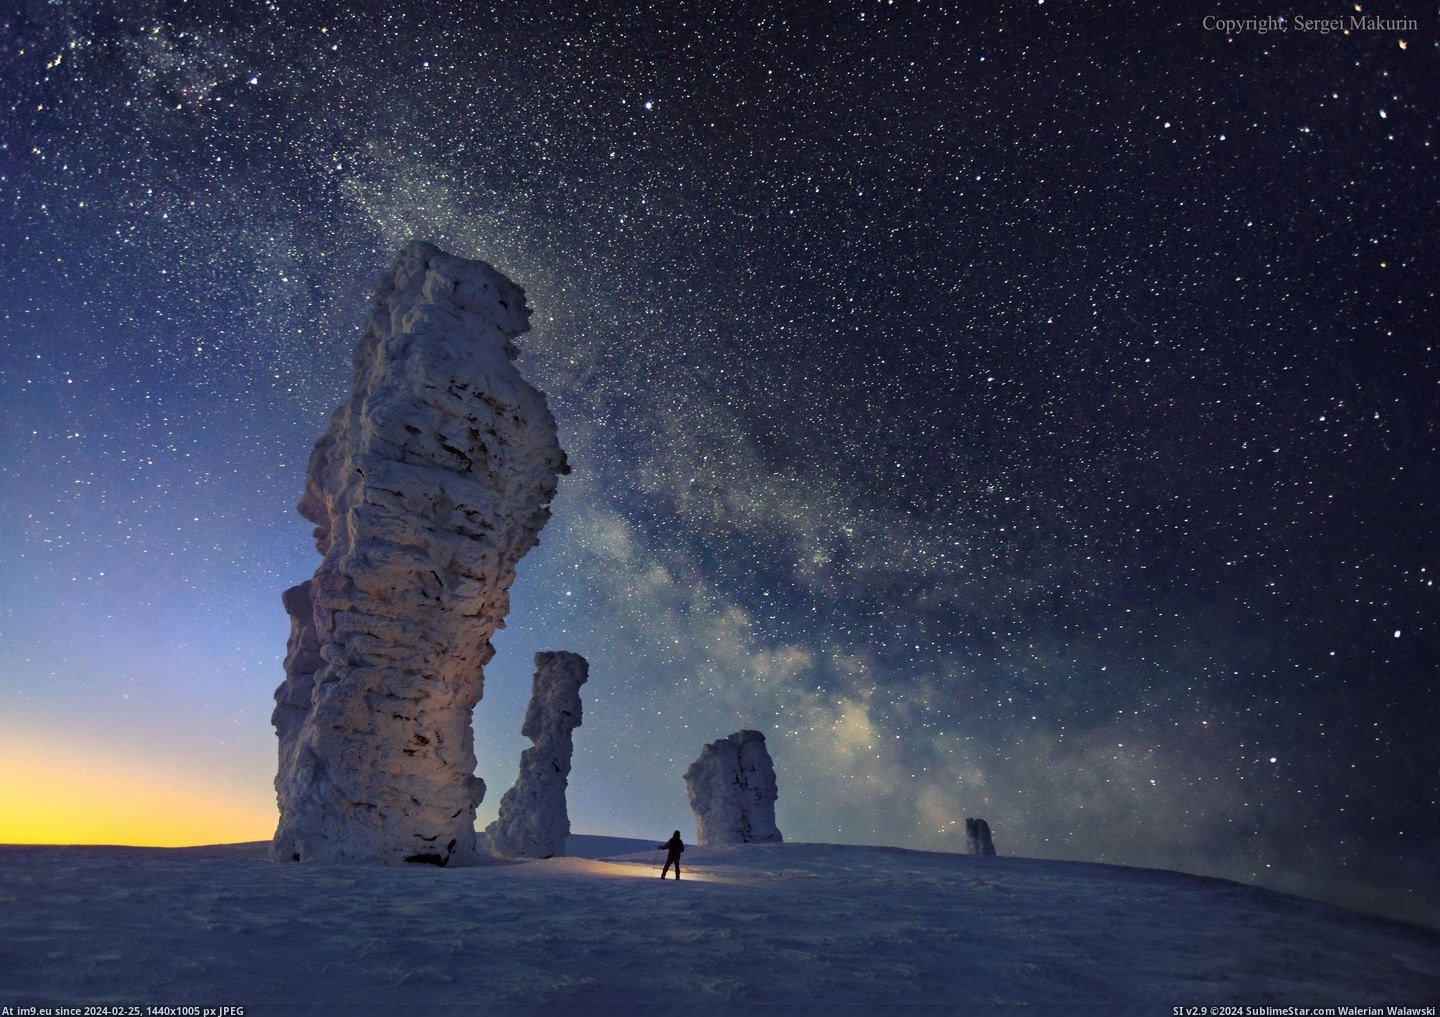 #Wallpaper #Beautiful #Russia #Republic #Formations #Wide #Rock [Earthporn] Manpupuner rock formations, Komi Republic, Russia. [3122x2190] [OS] by Sergei Makurin Pic. (Изображение из альбом My r/EARTHPORN favs))